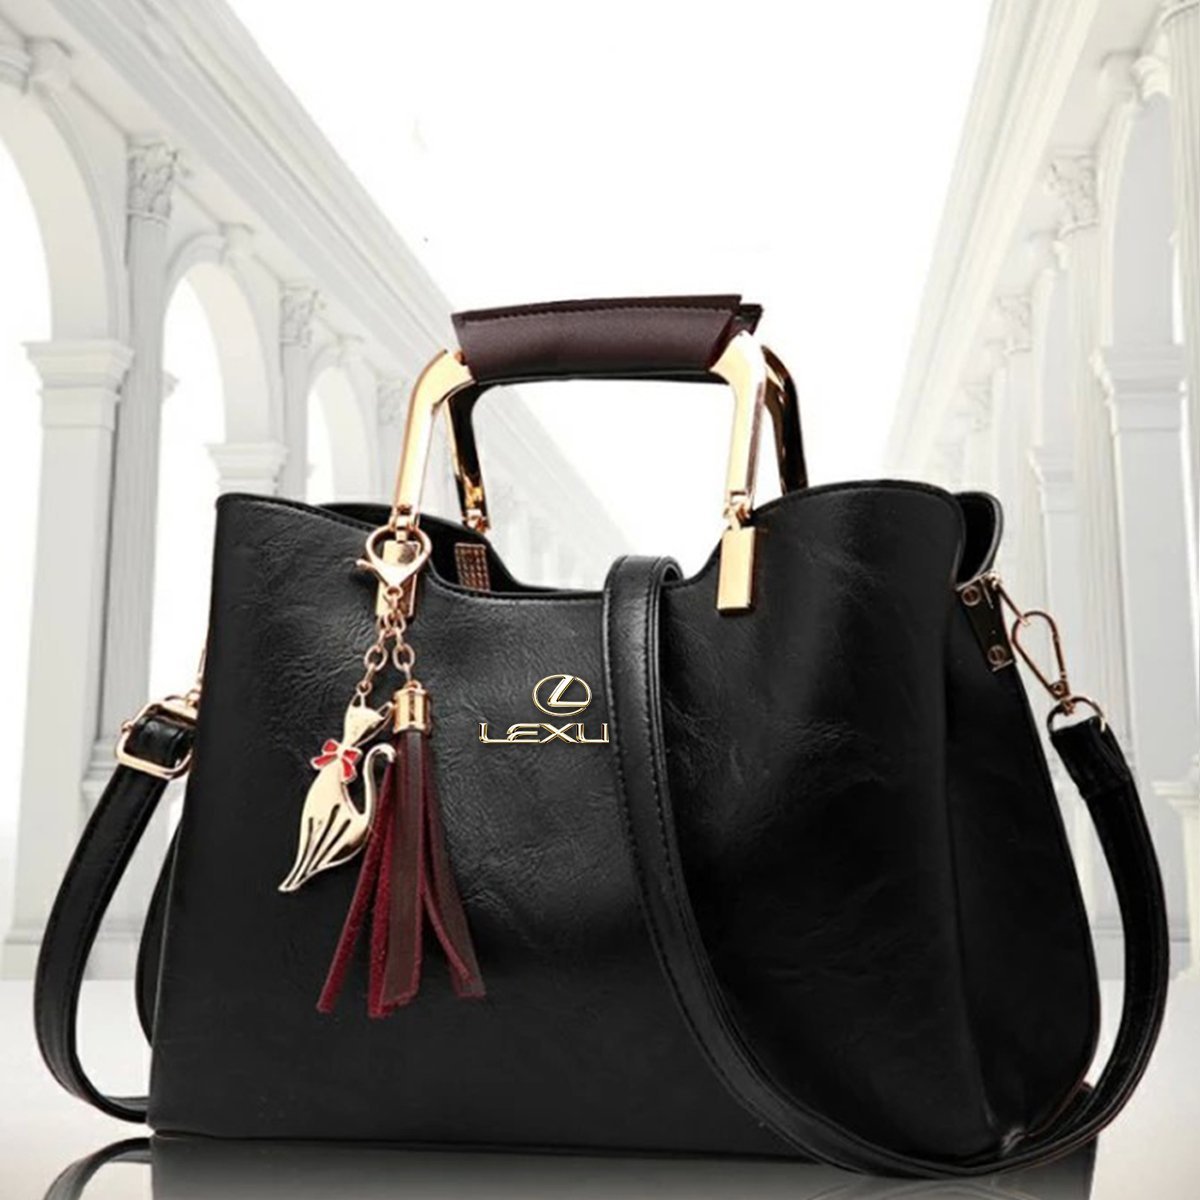 leather bags price